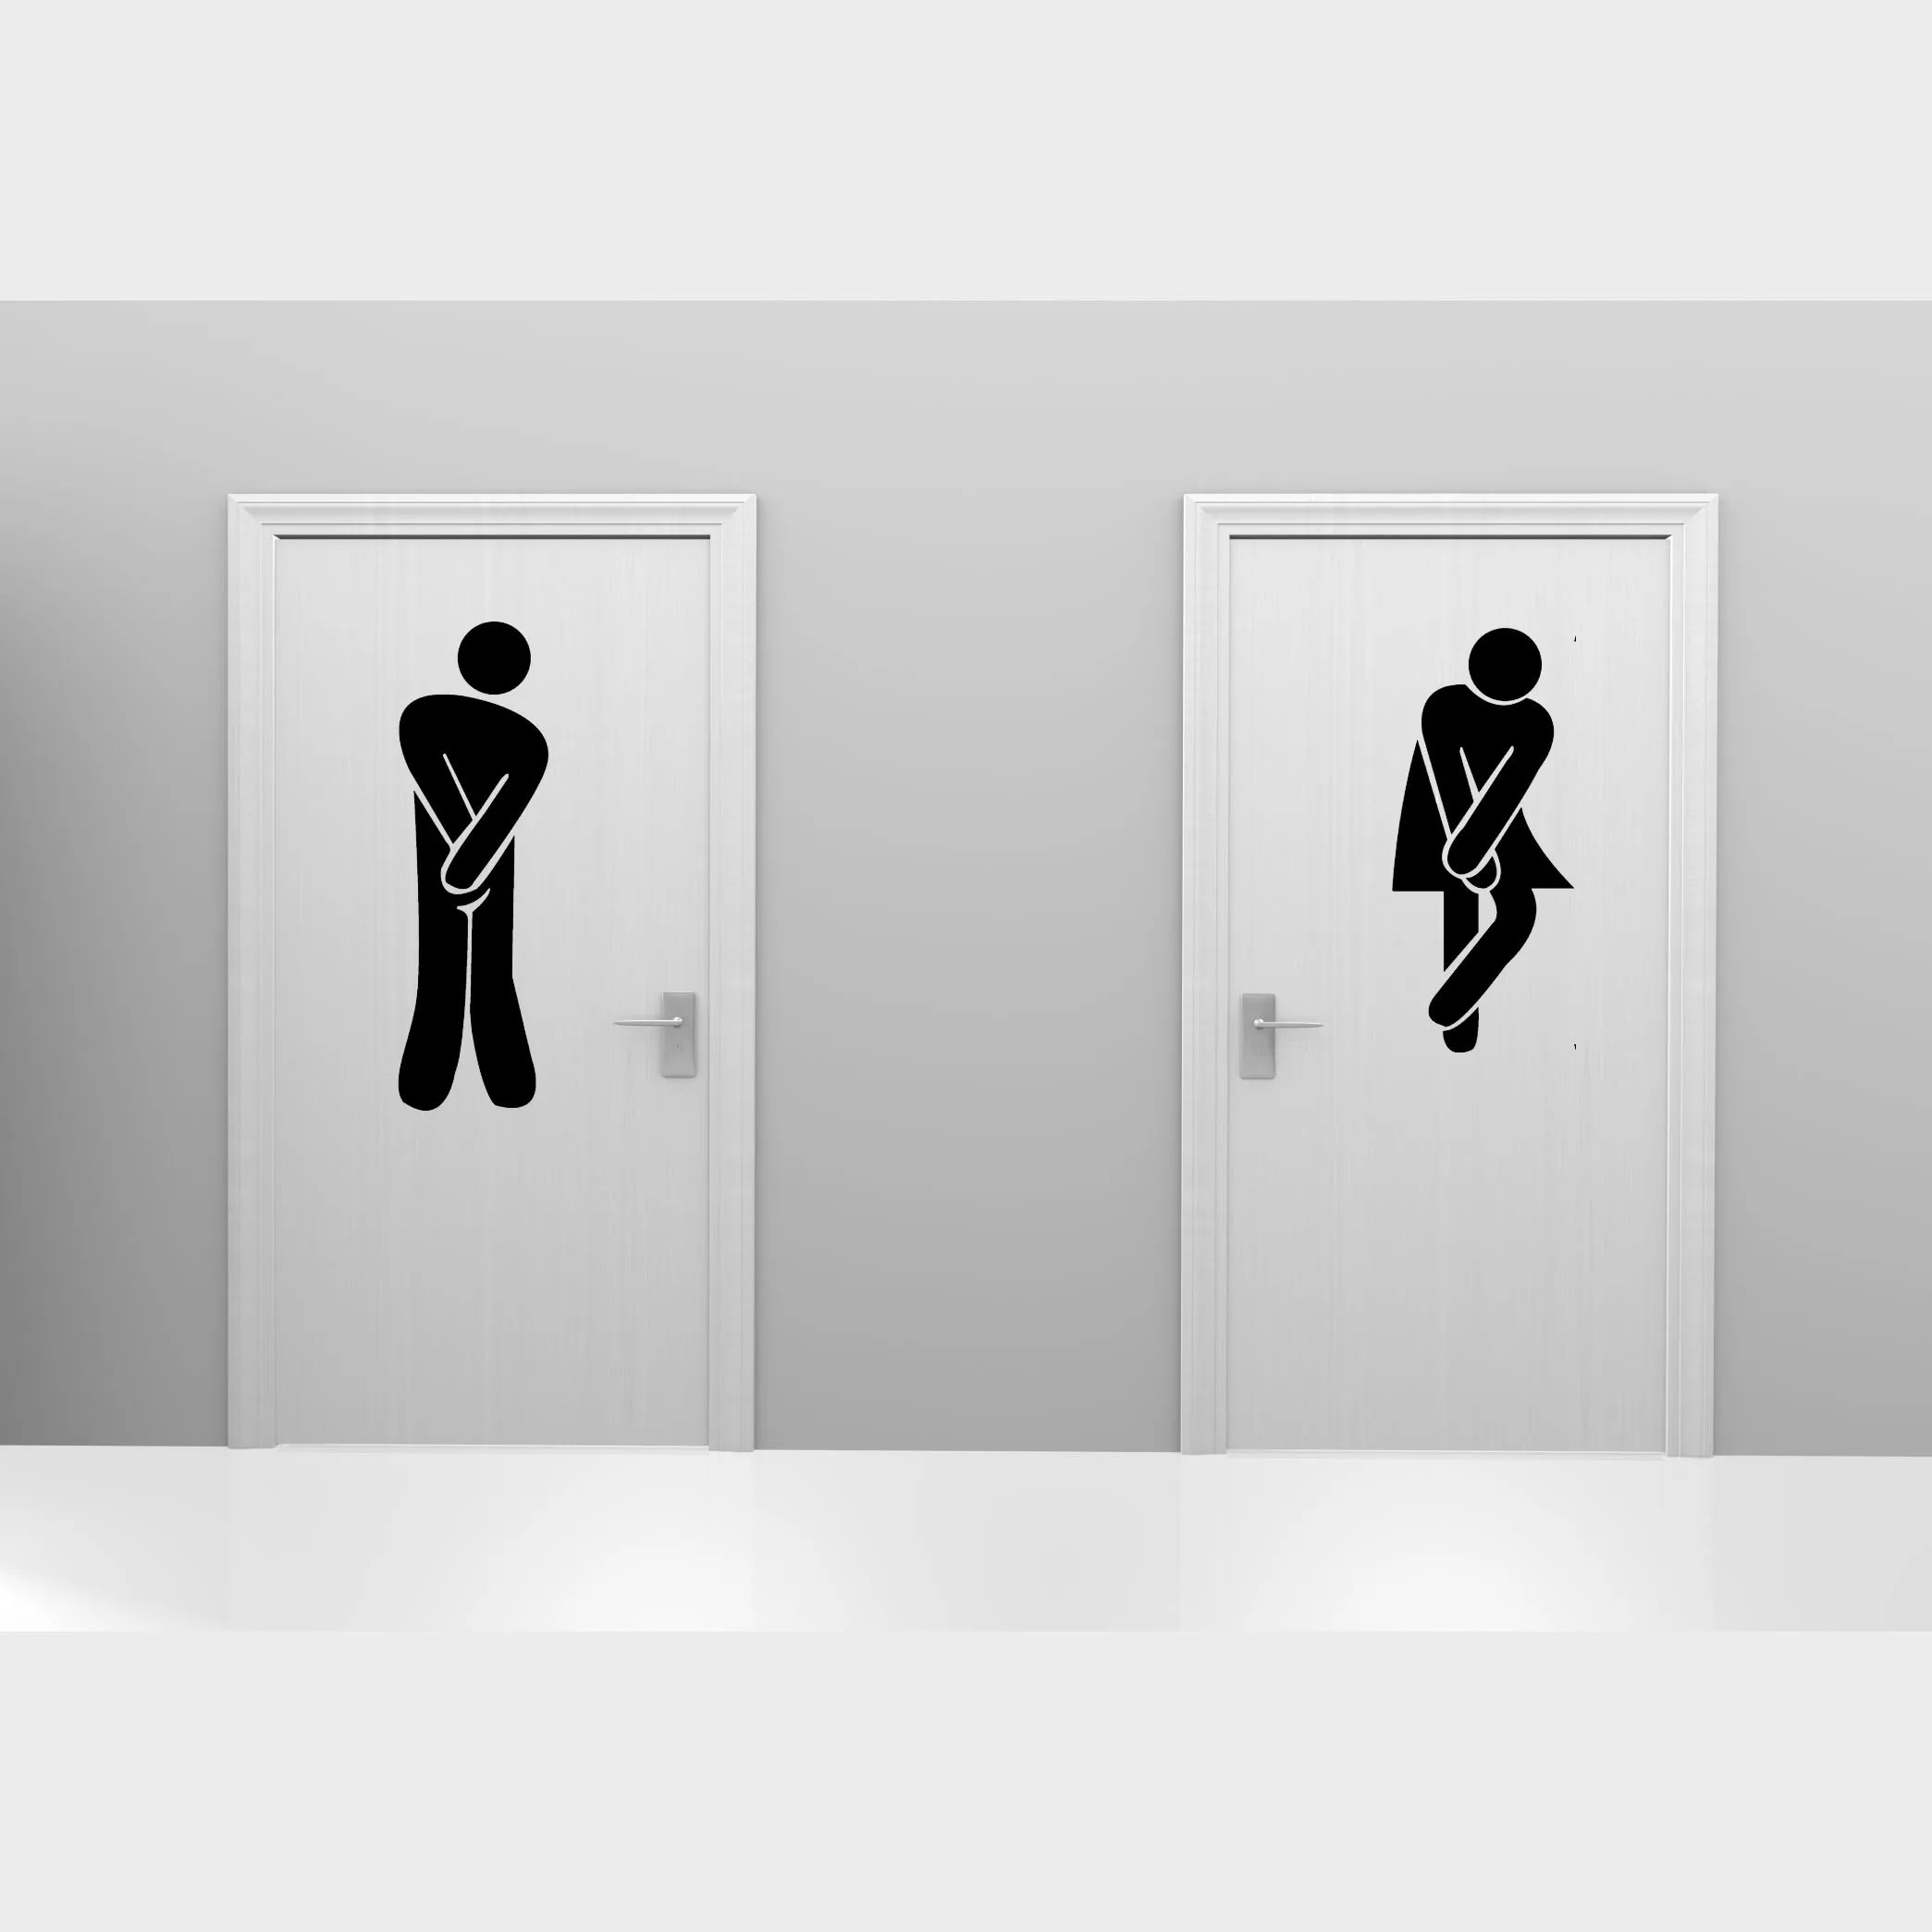 Removable Toilet Door Sticker Funny Bathroom Washroom Wc Wall Decals,Family  Diy Decor Art Stickers Home Decor For Kids - Buy Vinyl Decal,Die Cut Sticker ,Funny Die Cut Sticker Product on 